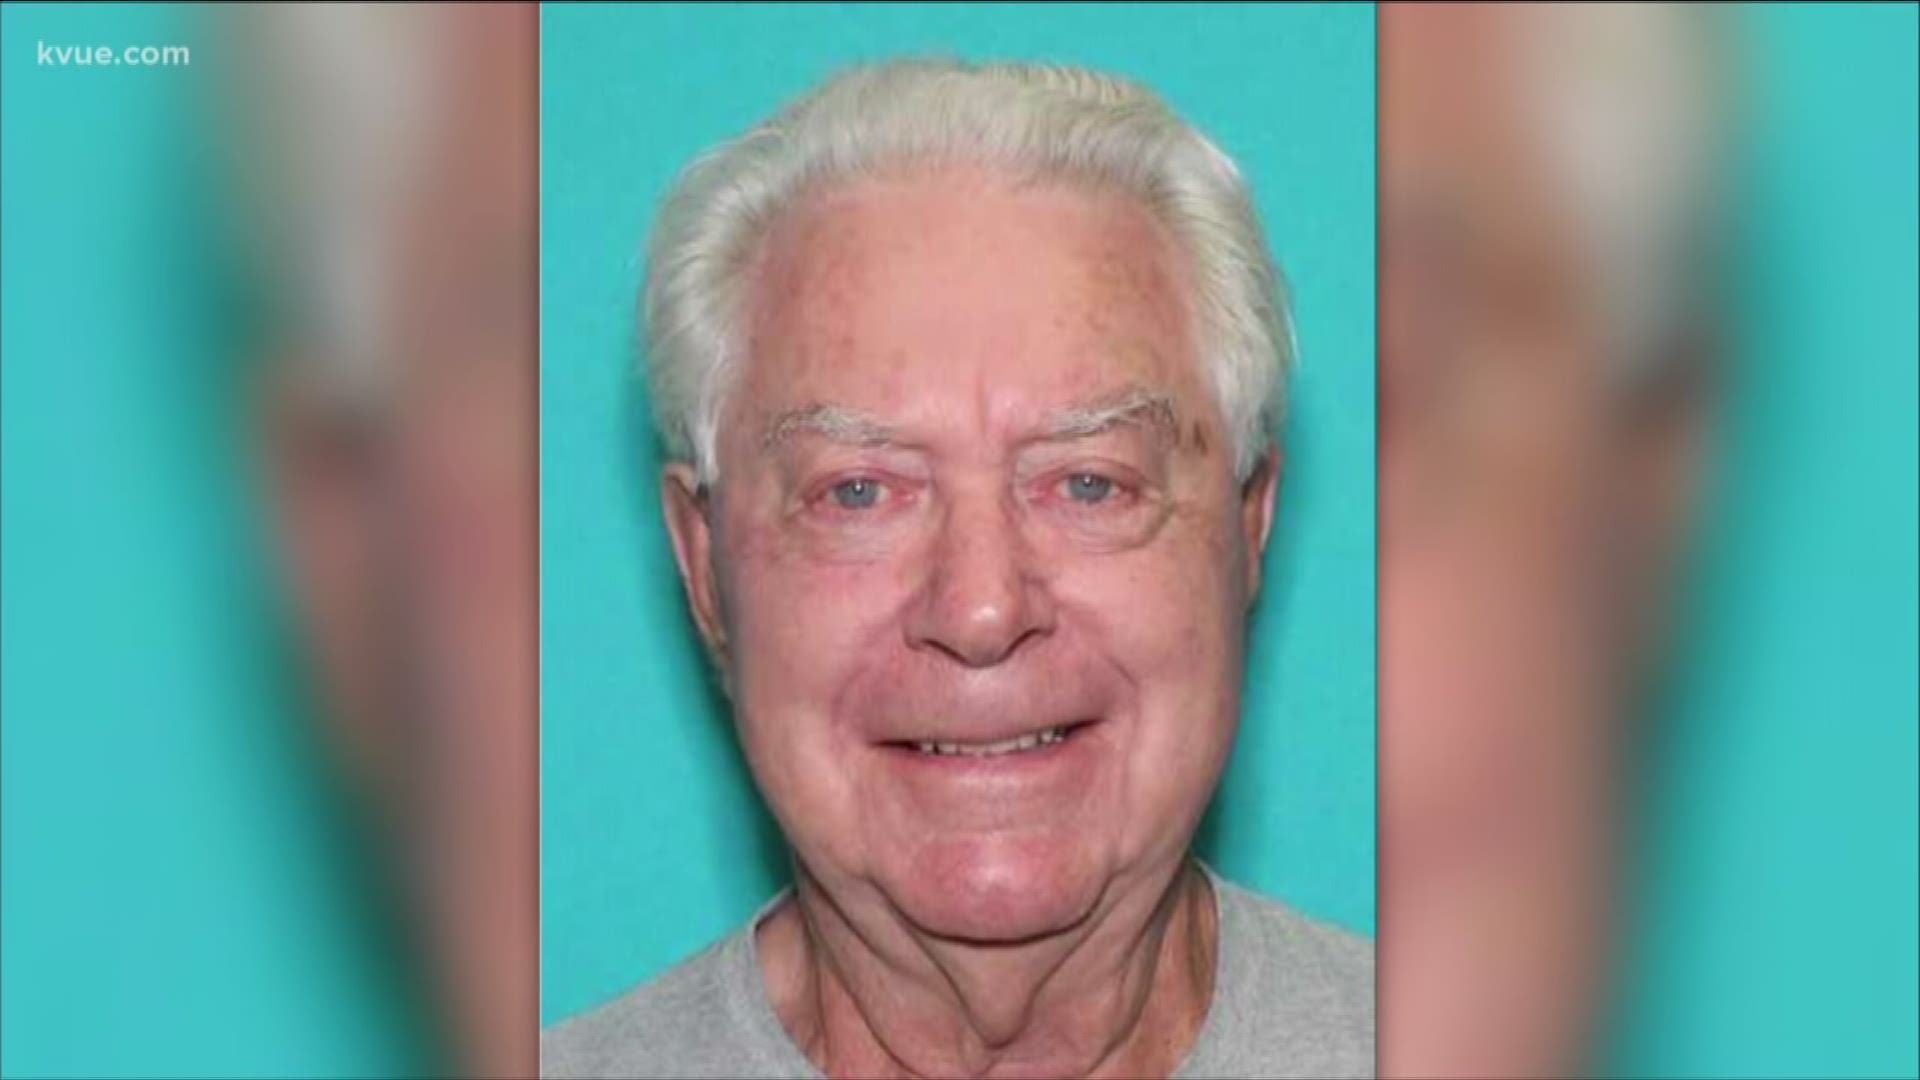 Officials described Devaul as an 83-year-old white man who is is roughly 6 feet, 2 inches tall. He weighs 192 pounds and has gray hair, blue eyes and was last seen wearing a light green golf shirt and blue pants.